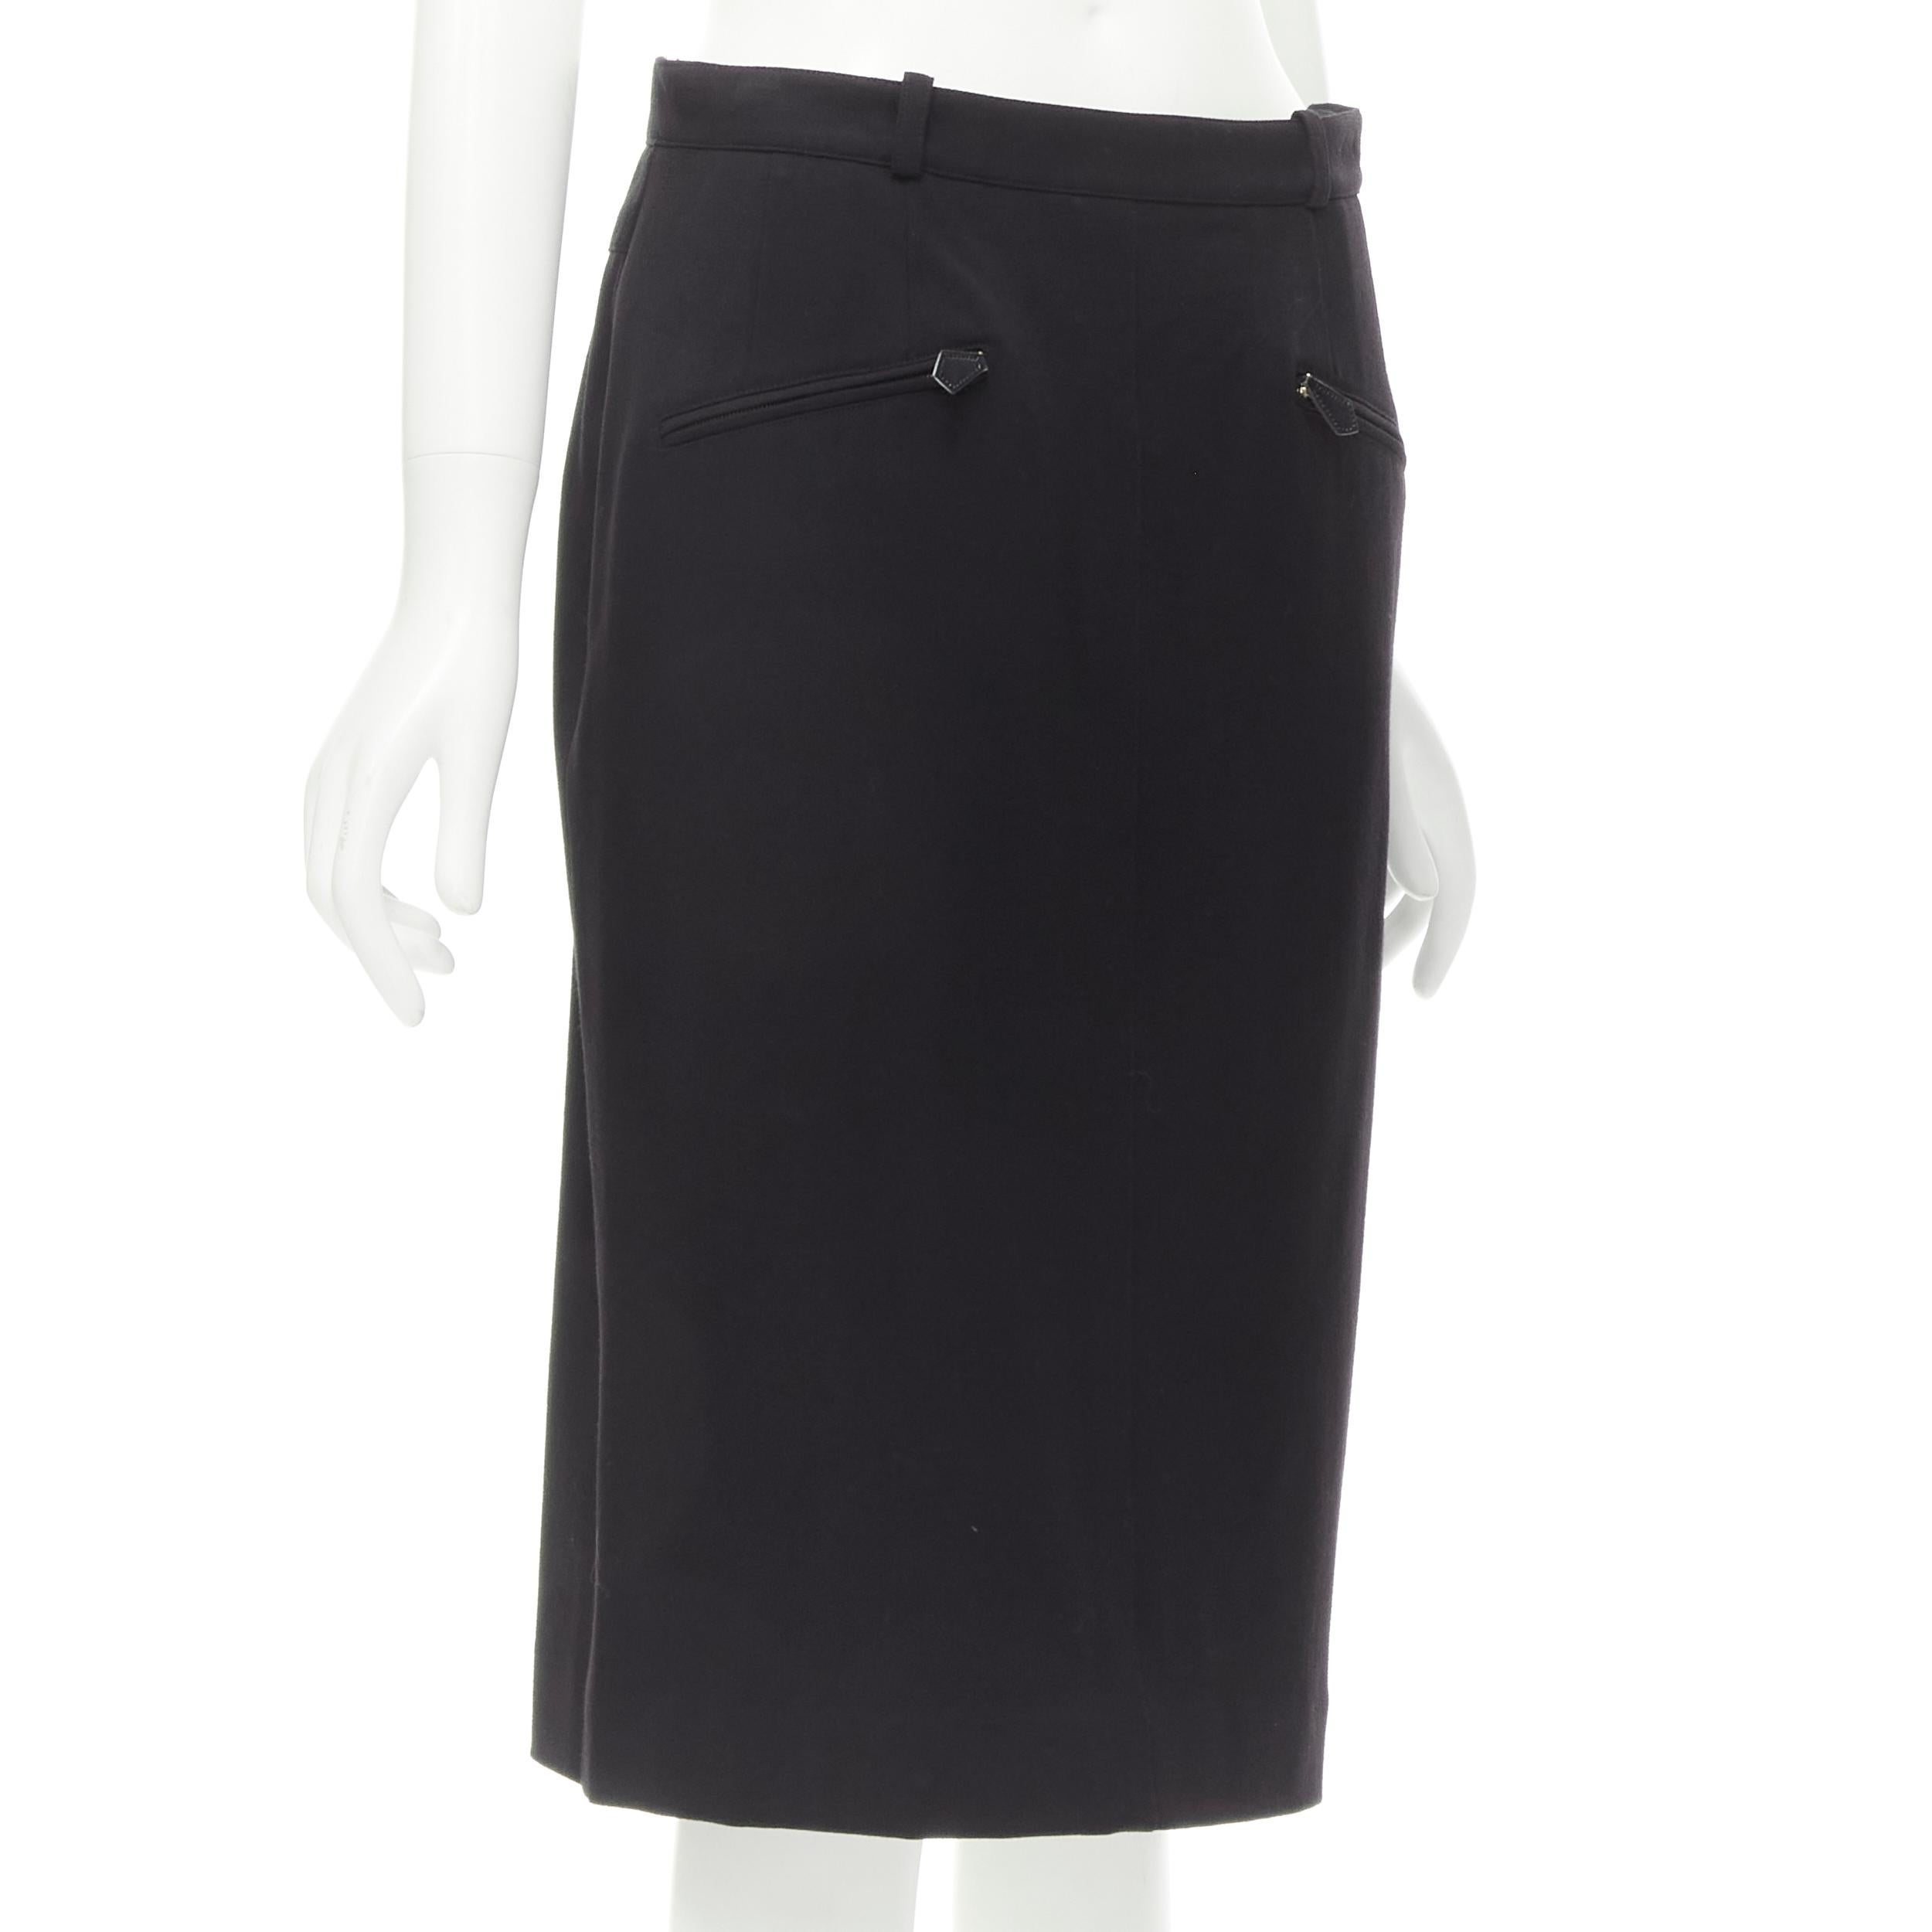 HERMES Vintage brown wool blend leather Sellier zipper pencil skirt FR42 L 
Reference: JYLM/A00024 
Brand: Hermes 
Material: Wool 
Color: Black 
Pattern: Solid 
Closure: Zip 
Extra Detail: Leather zipper pull. 
Made in: France 

CONDITION: